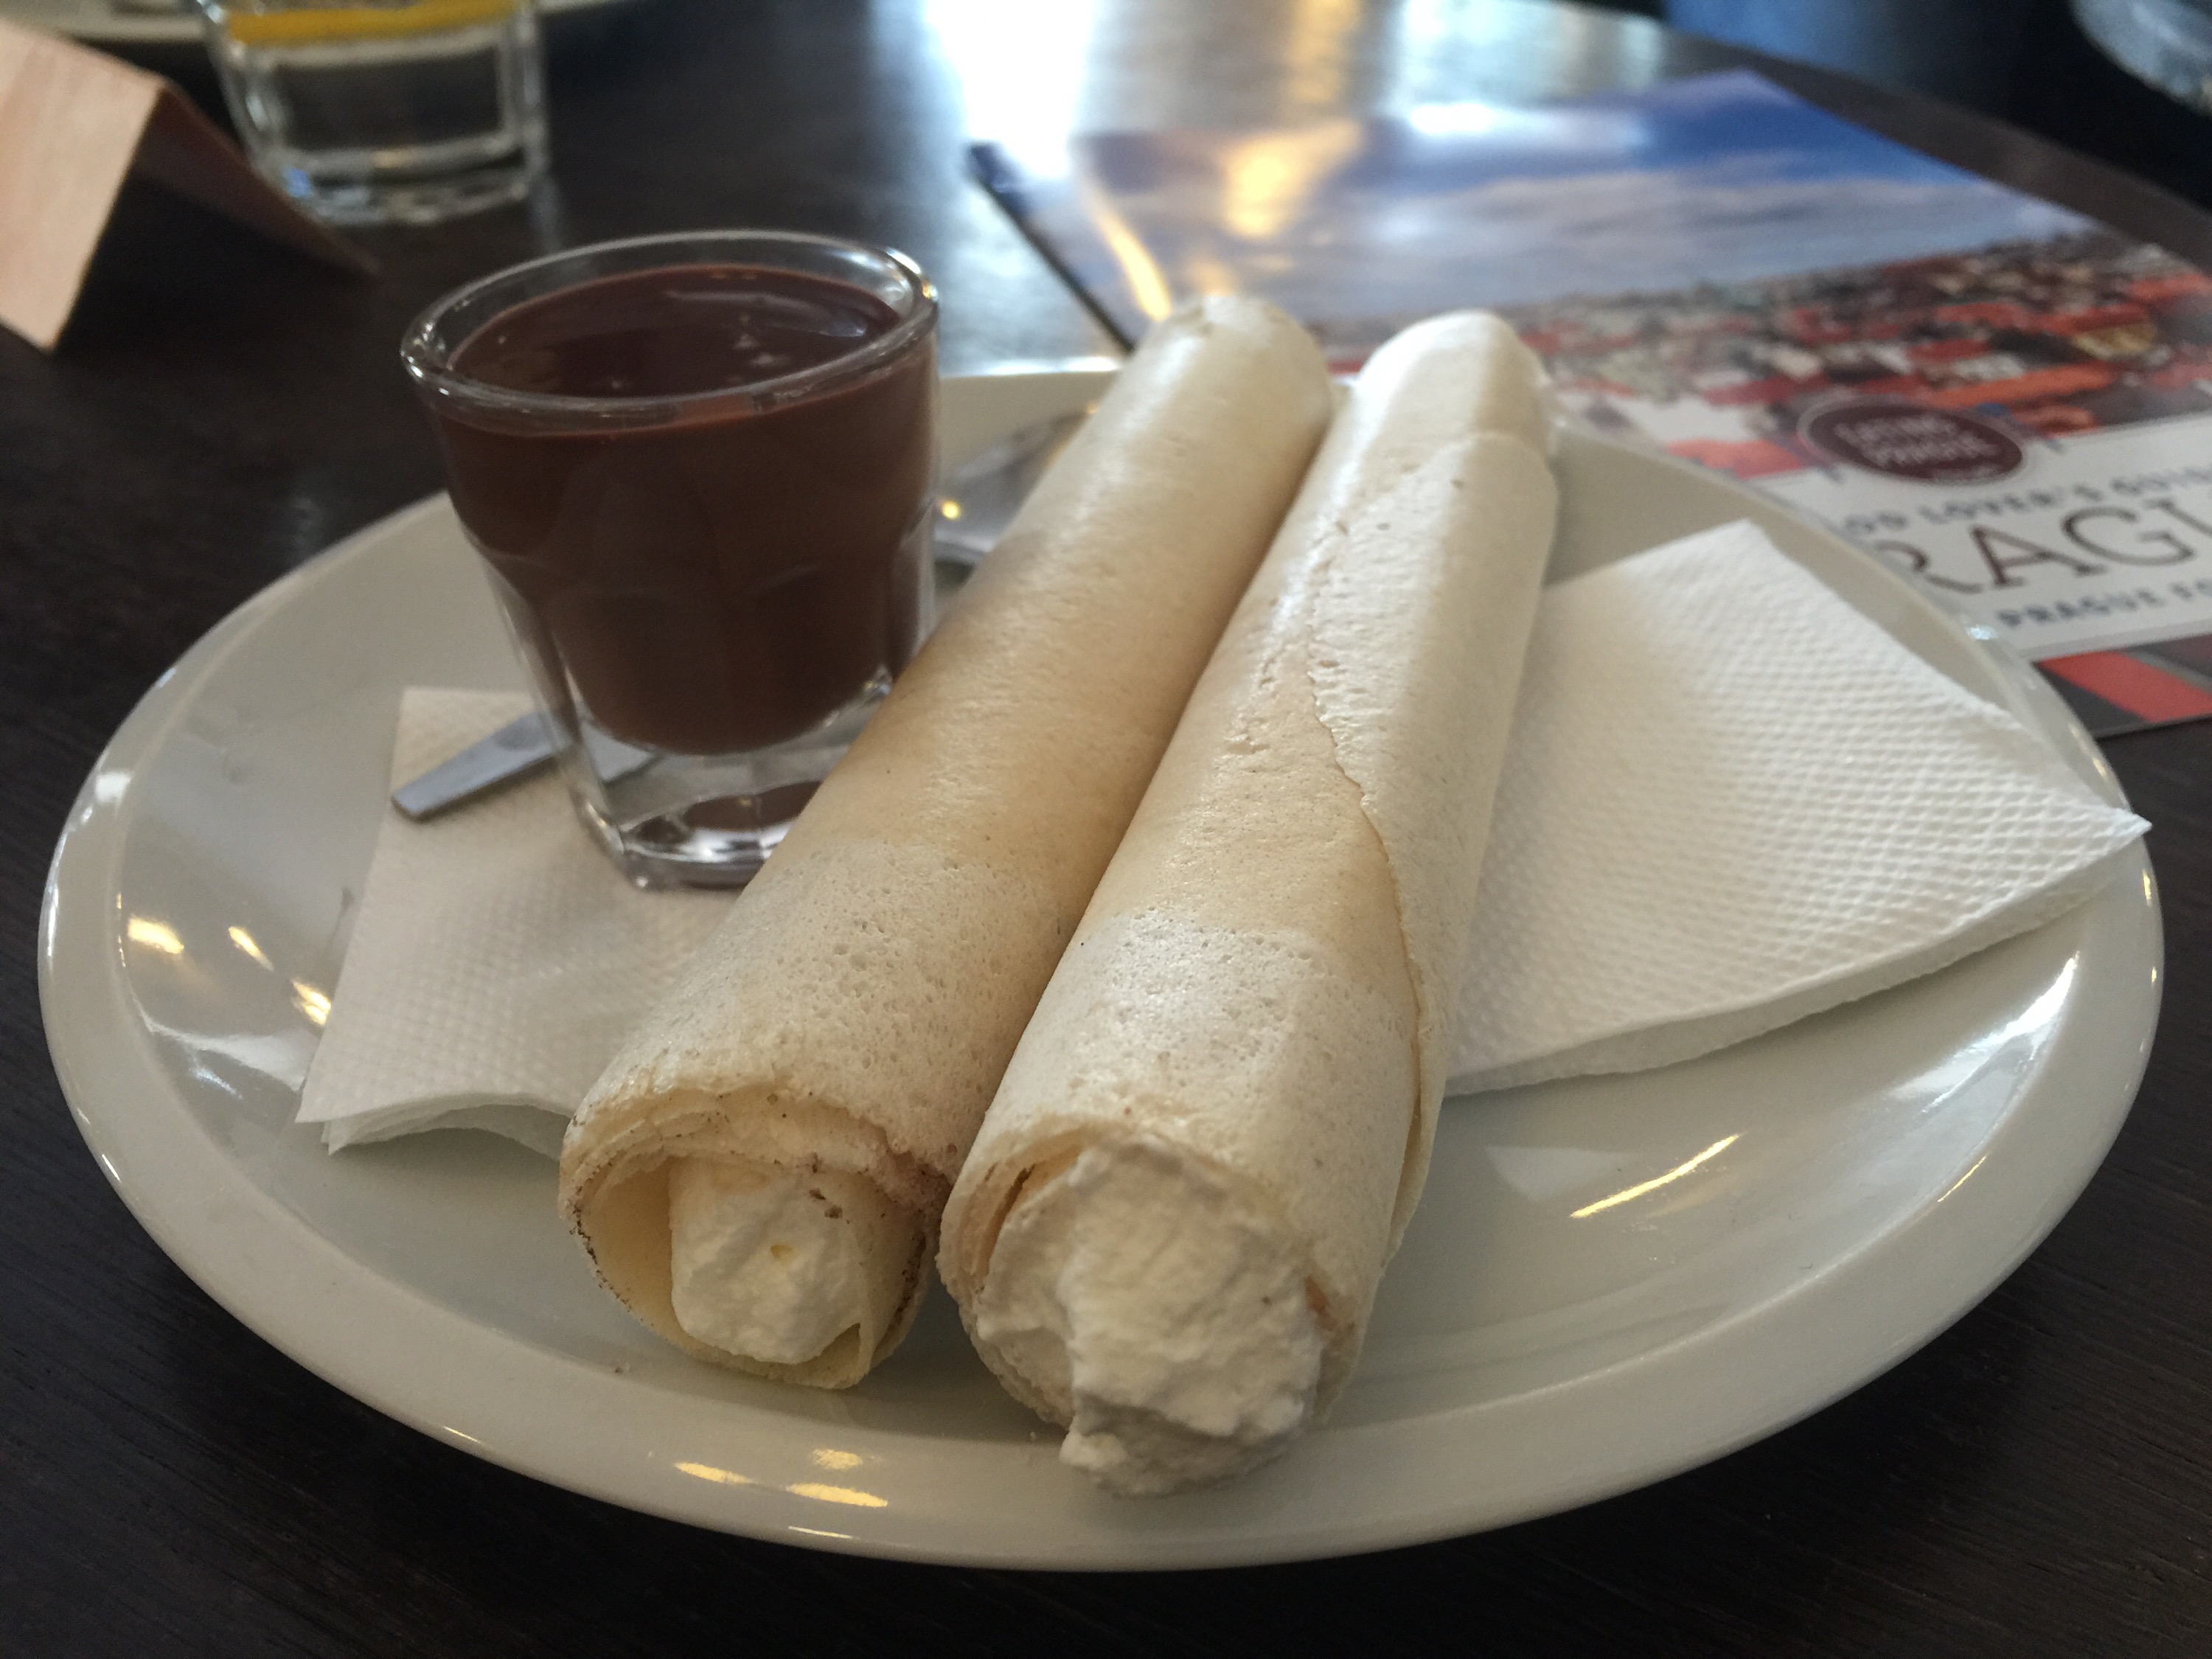 Horice rolled wafers filled with cream dipped in chocolate at Choco Cafe on PieLadyLife,com